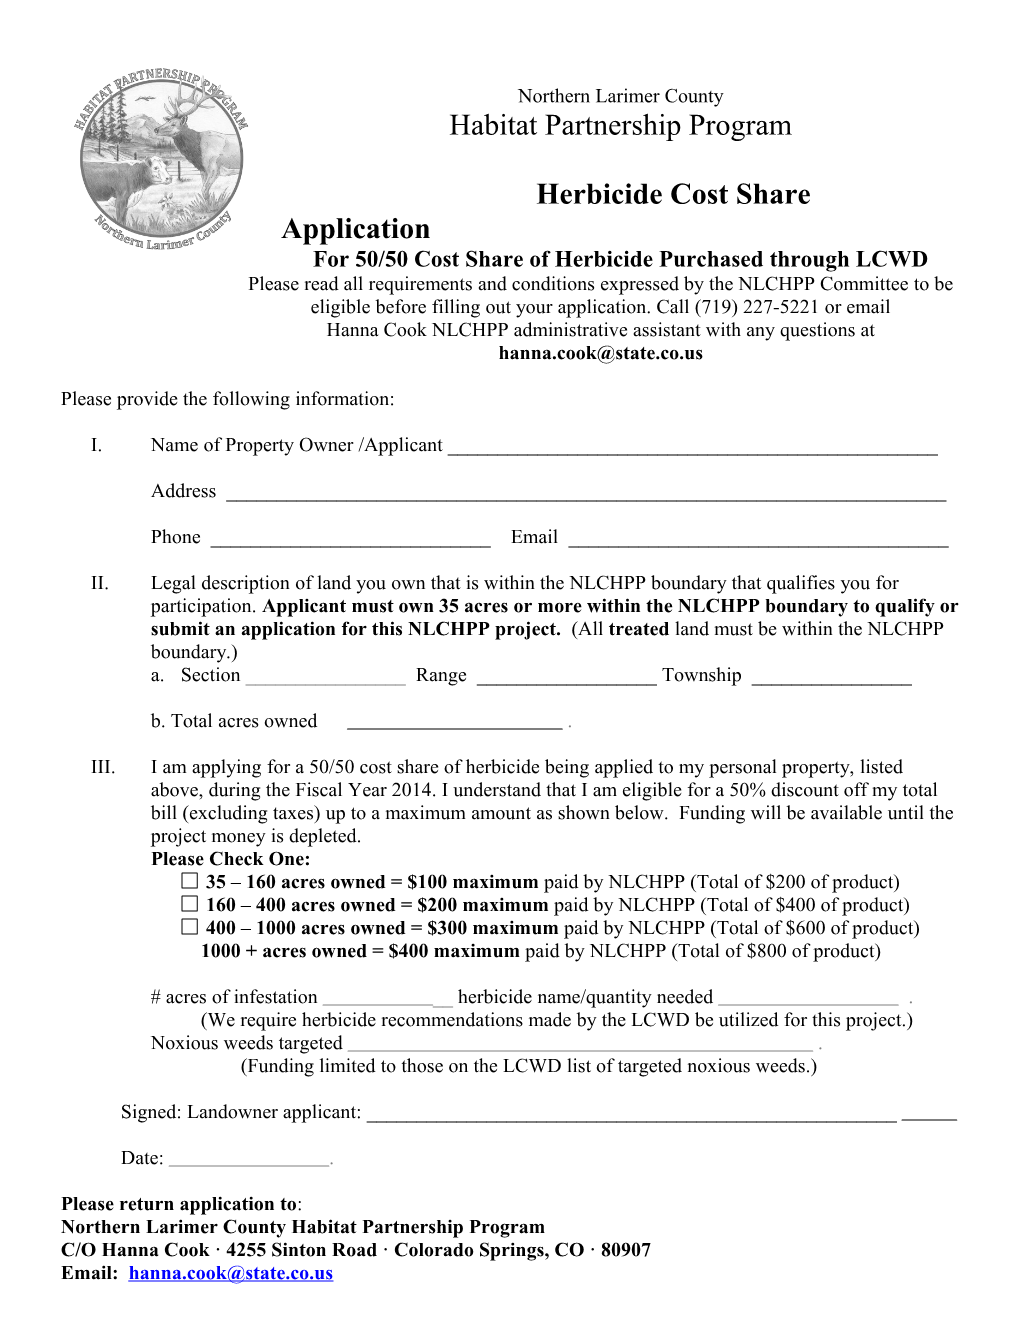 NLC Herbicide Voucher Guidelines and Application